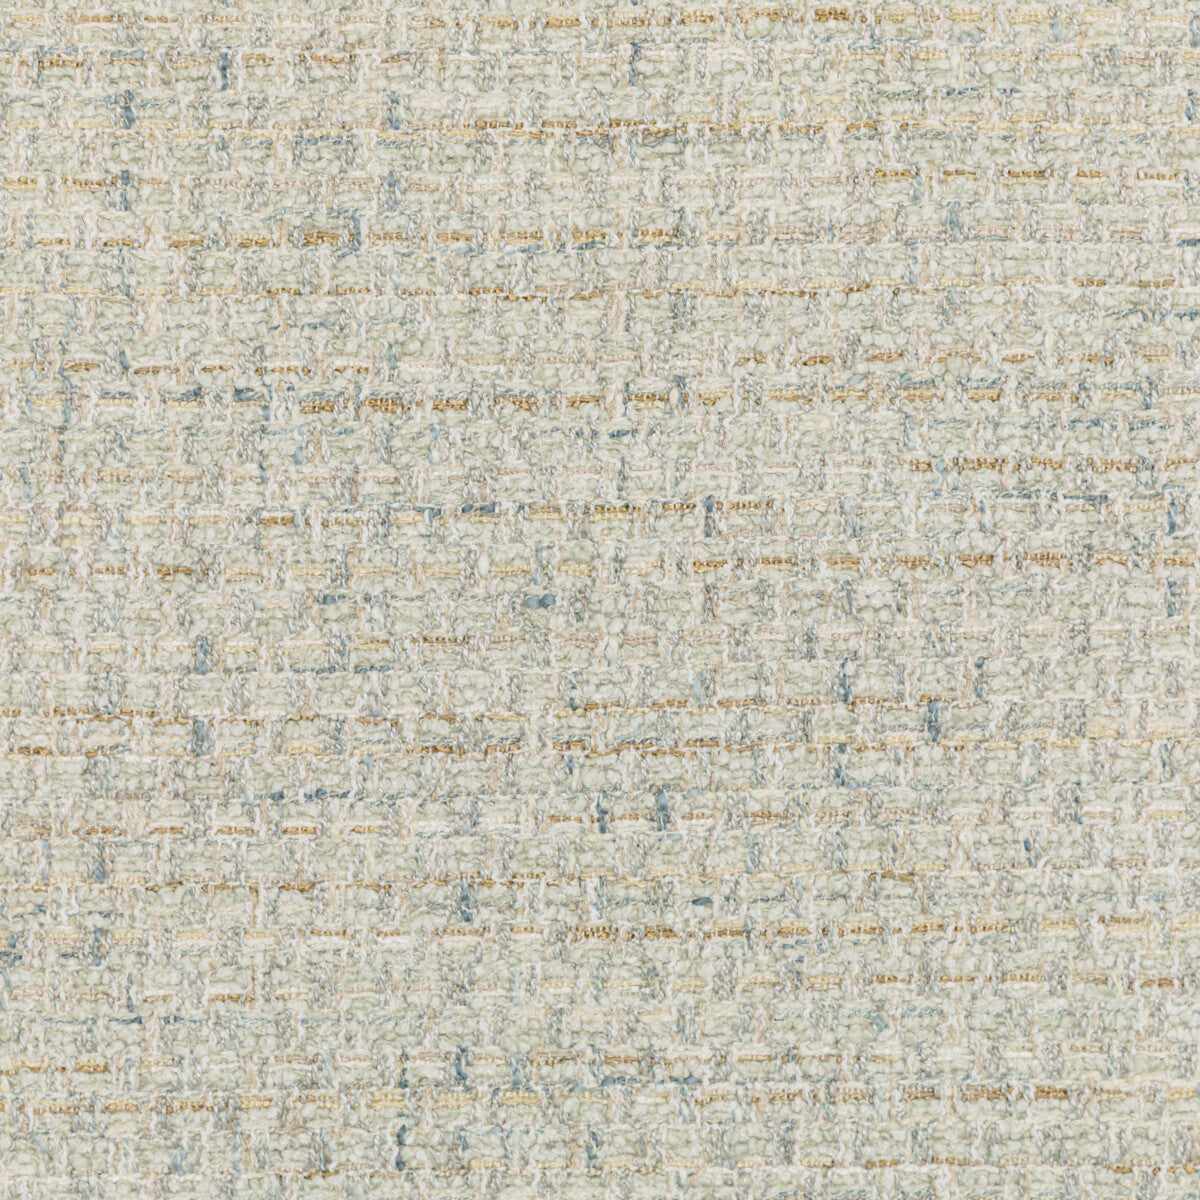 Rue Cambon fabric in pebble color - pattern 36102.1611.0 - by Kravet Couture in the Luxury Textures II collection